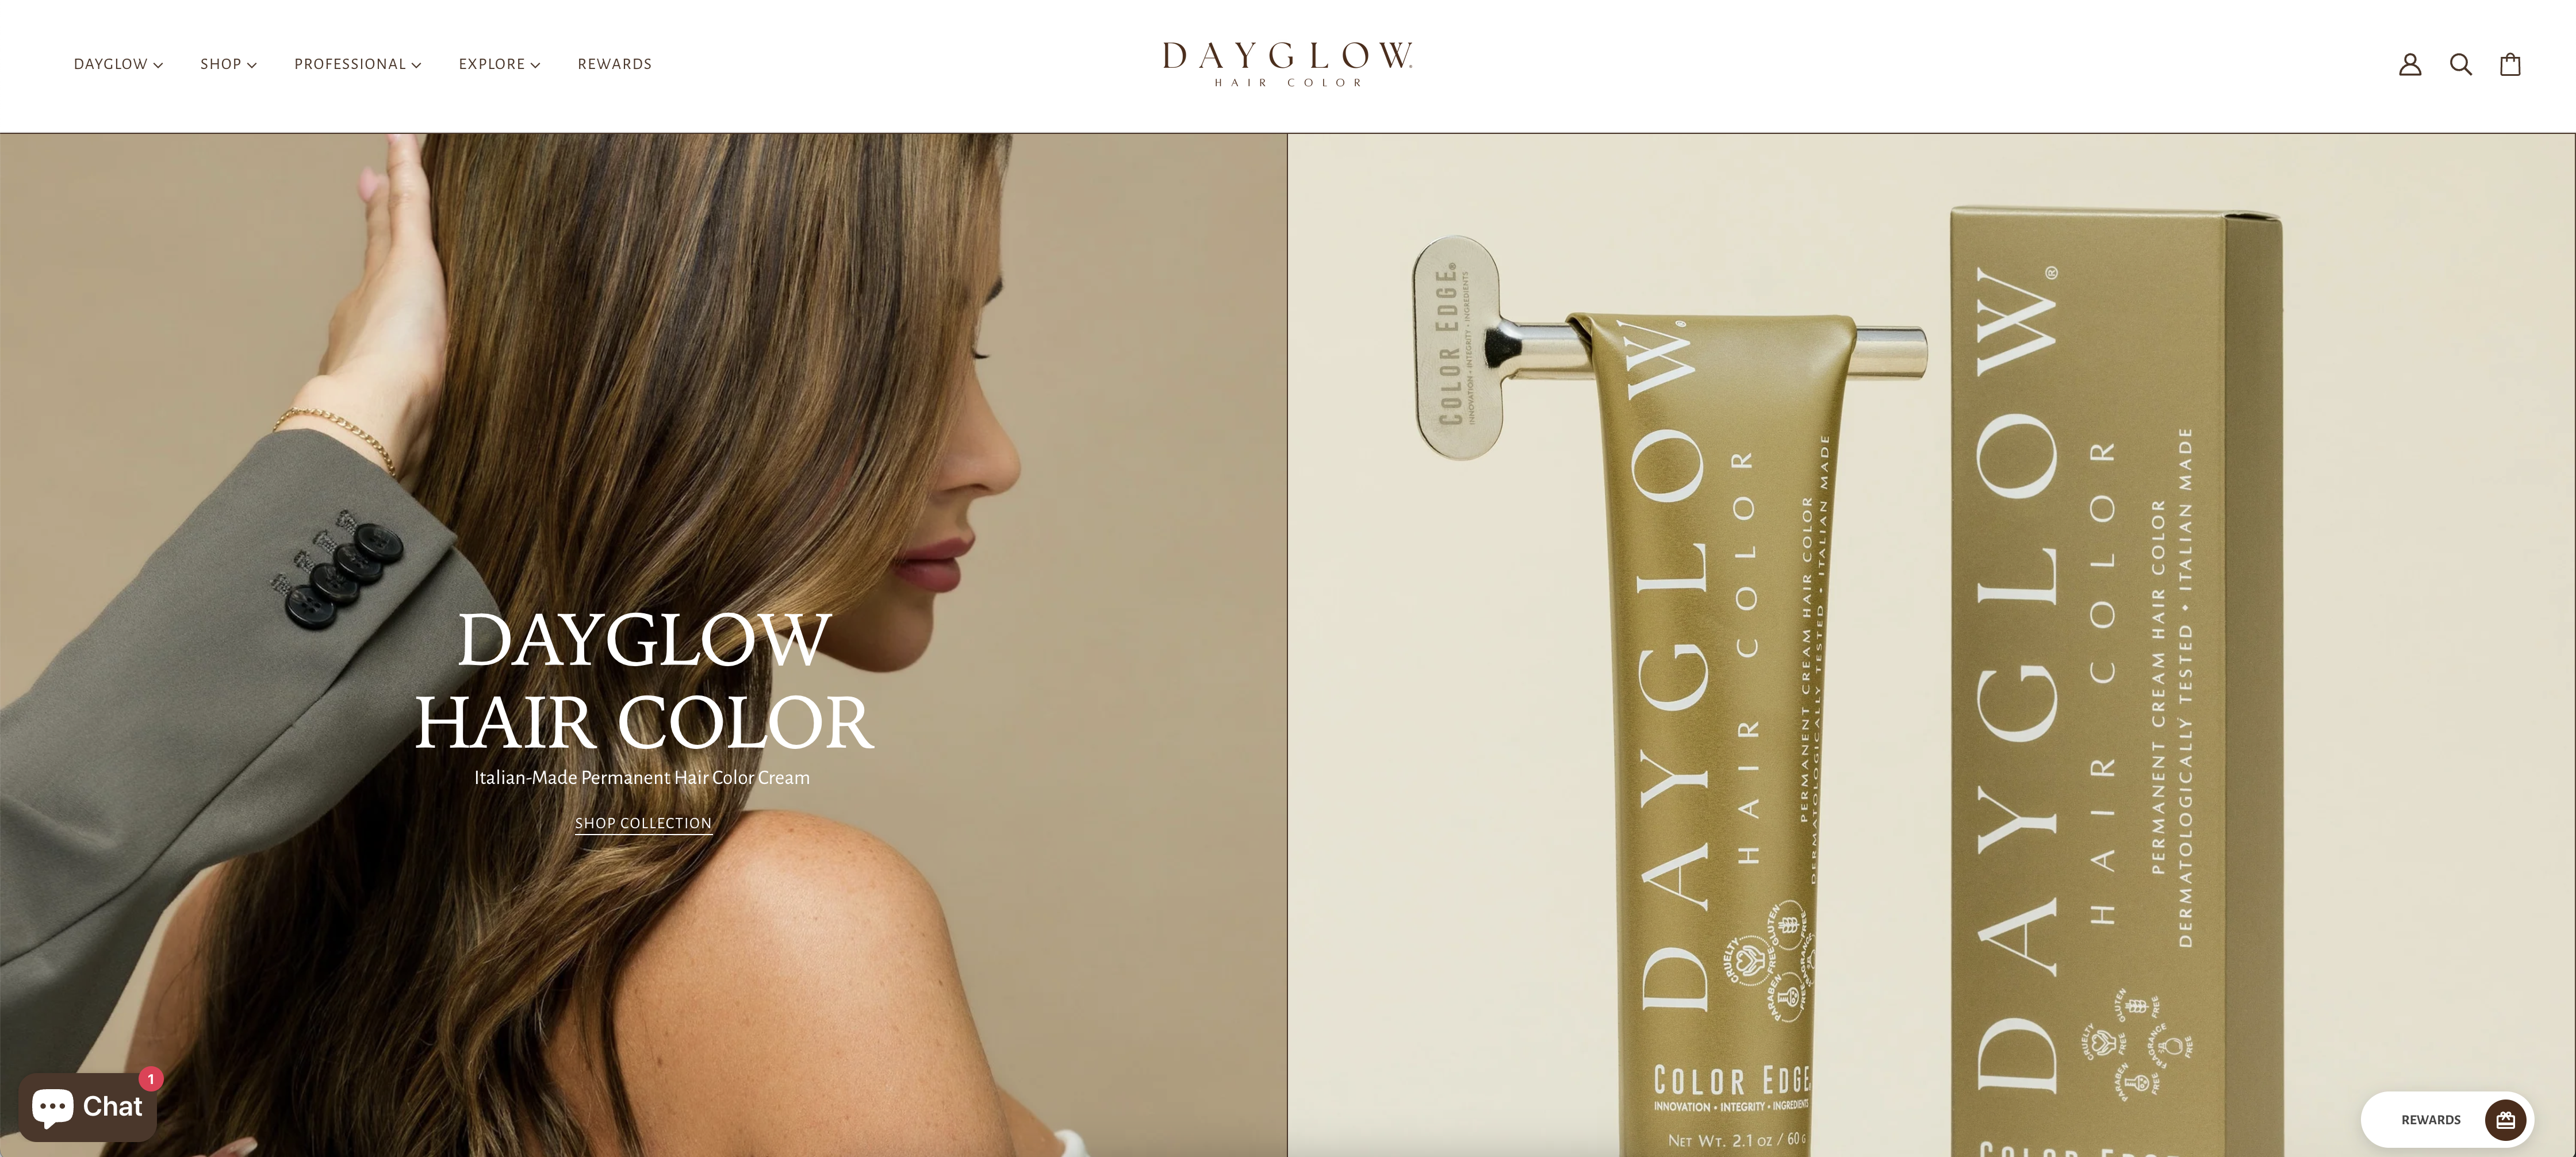 Dayglow Hair Color Website Home Page